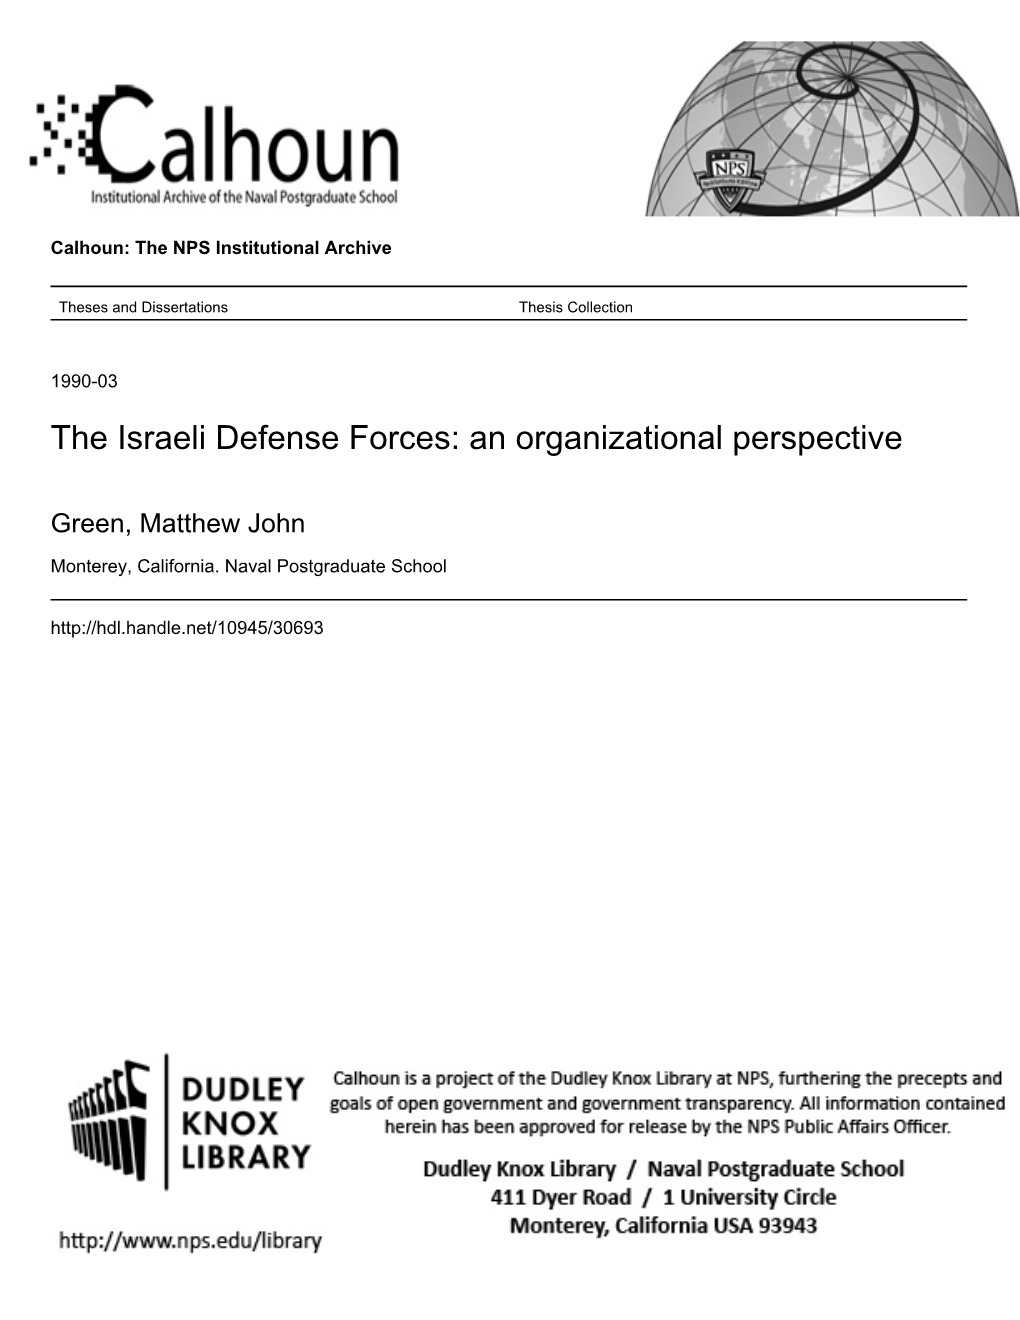 The Israeli Defense Forces: an Organizational Perspective